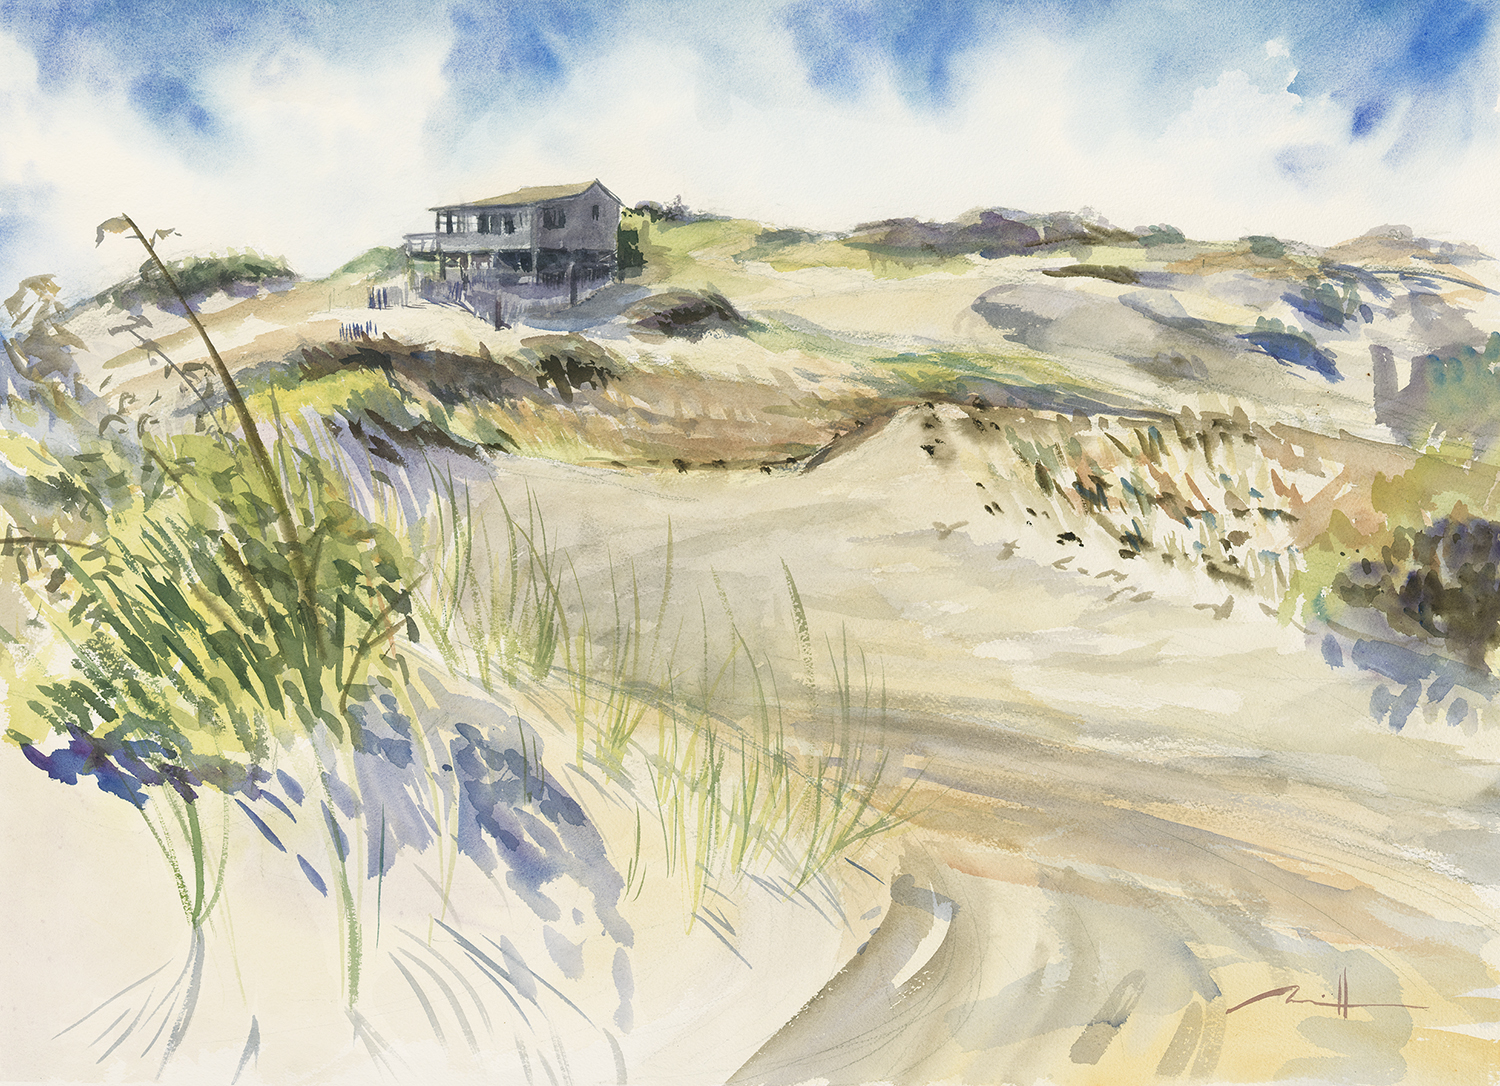    Ray Wells' Shack   22" x 30" watercolor on paper 